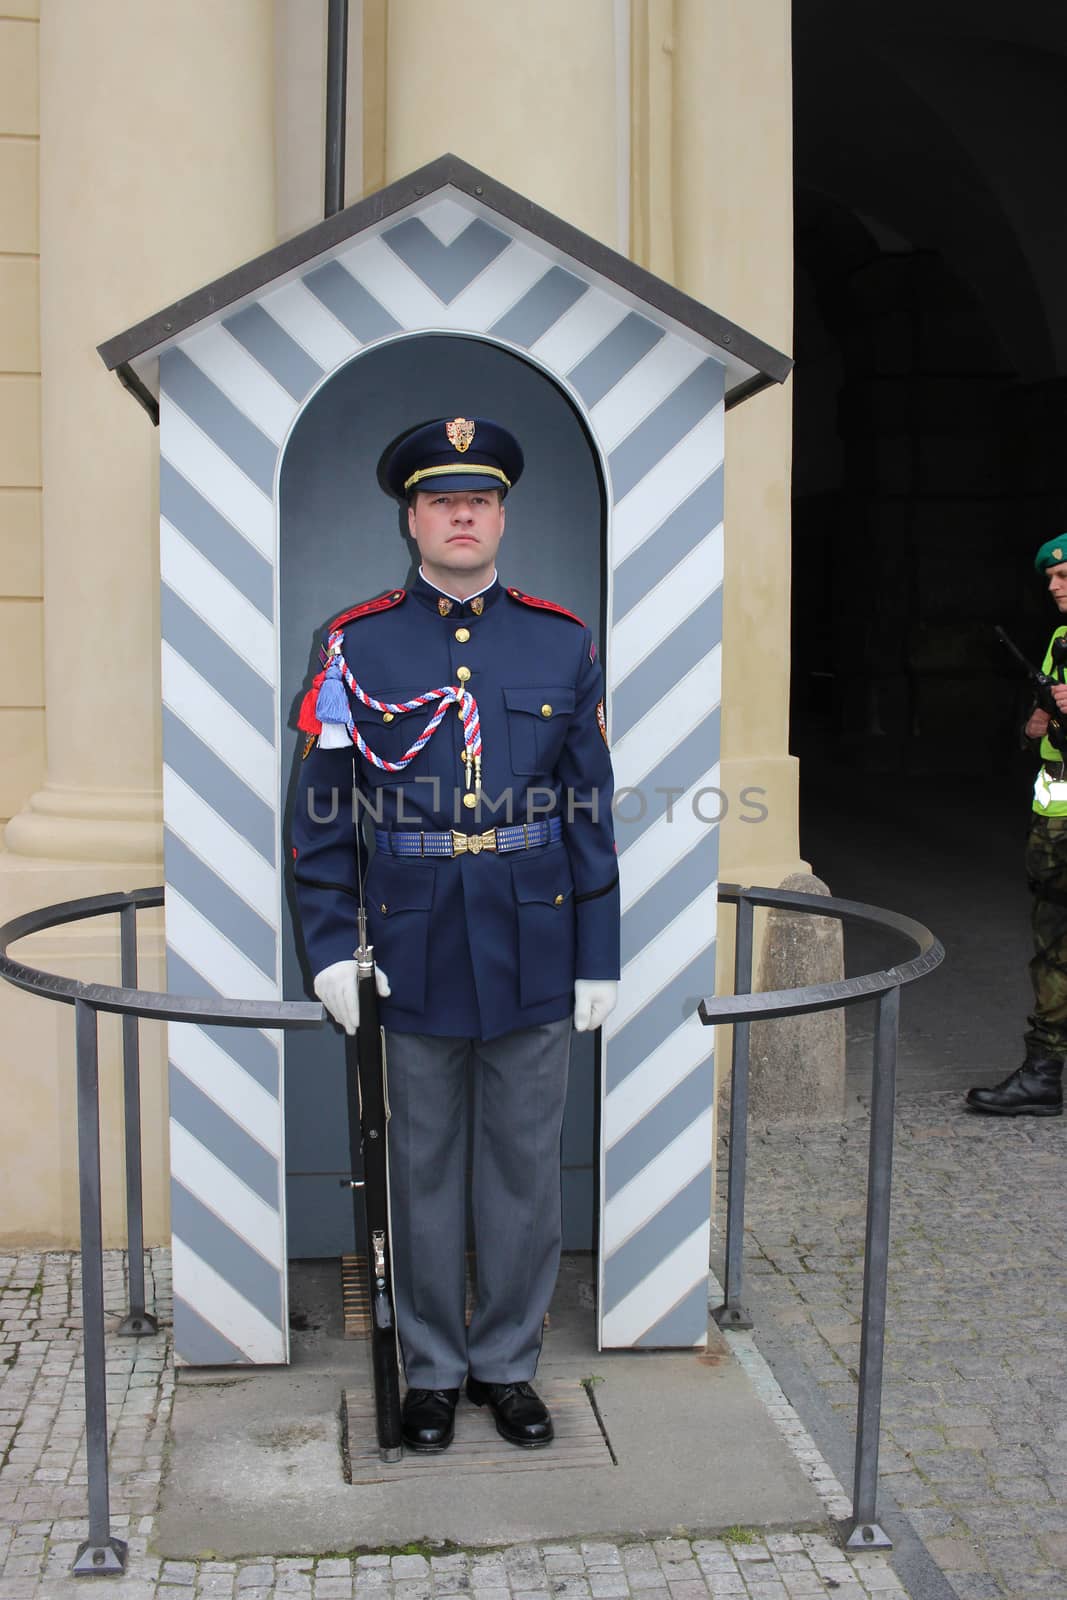 Prague, Czech Republic - April 23, 2016: The Guard of Honor Guards at the Presidential Palace in Prague castle